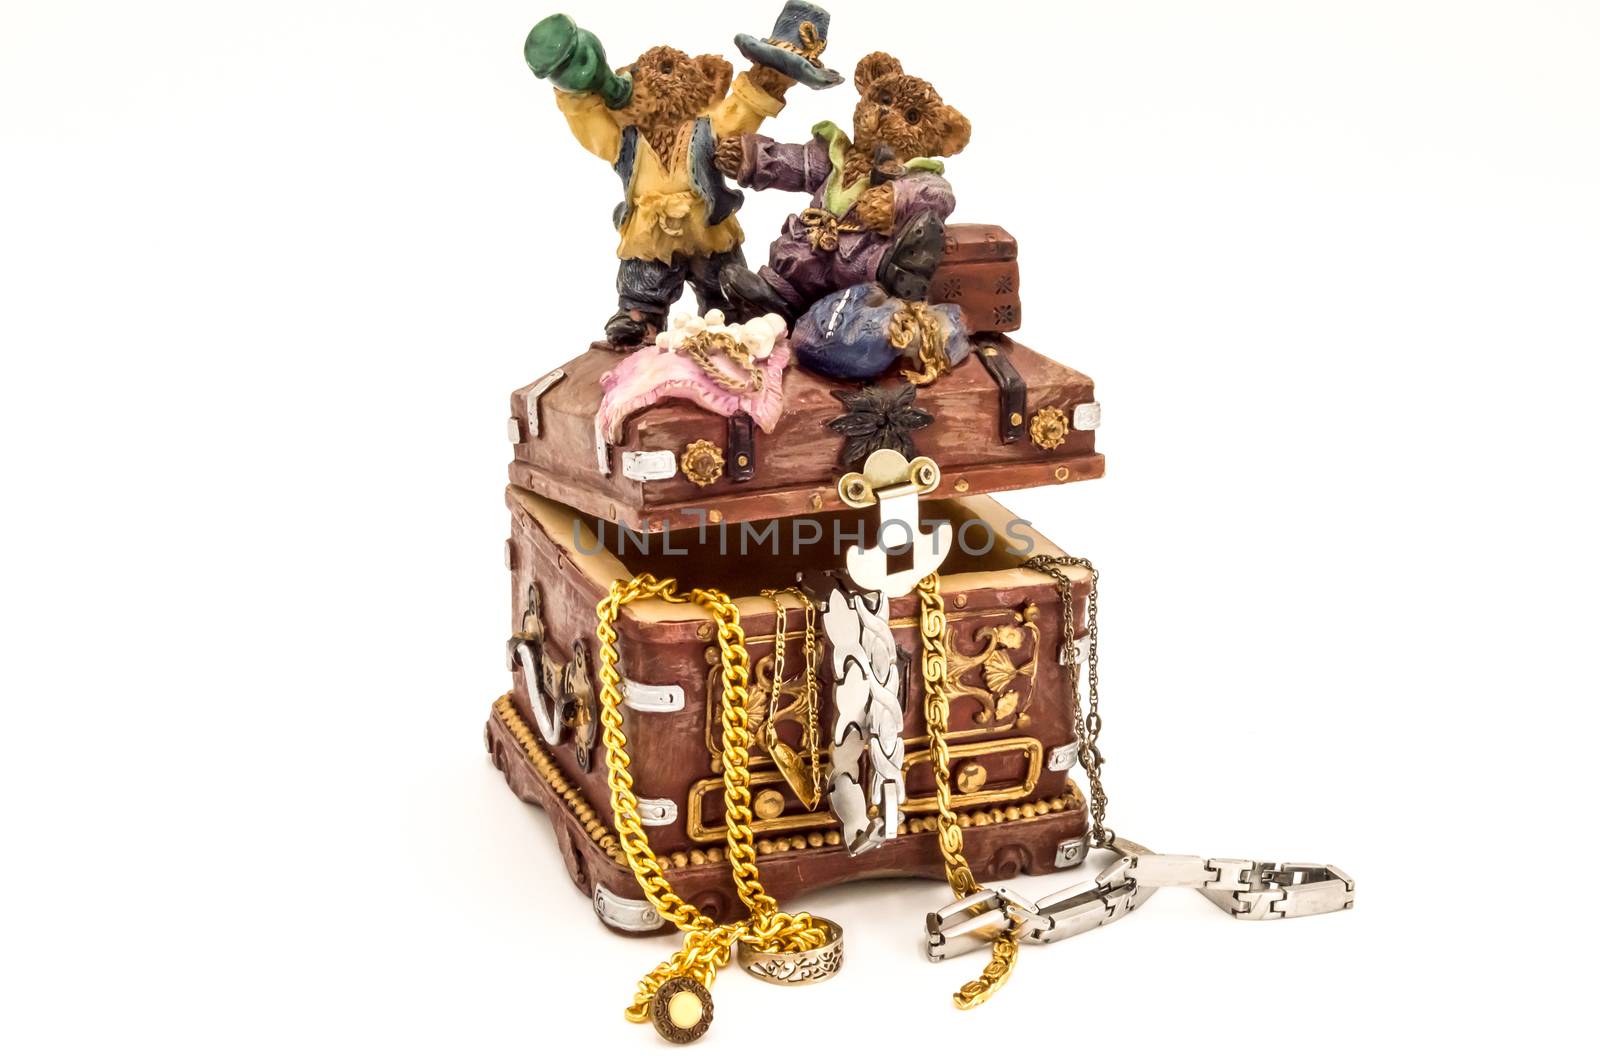 Treasure chest filled with jewelry on white background